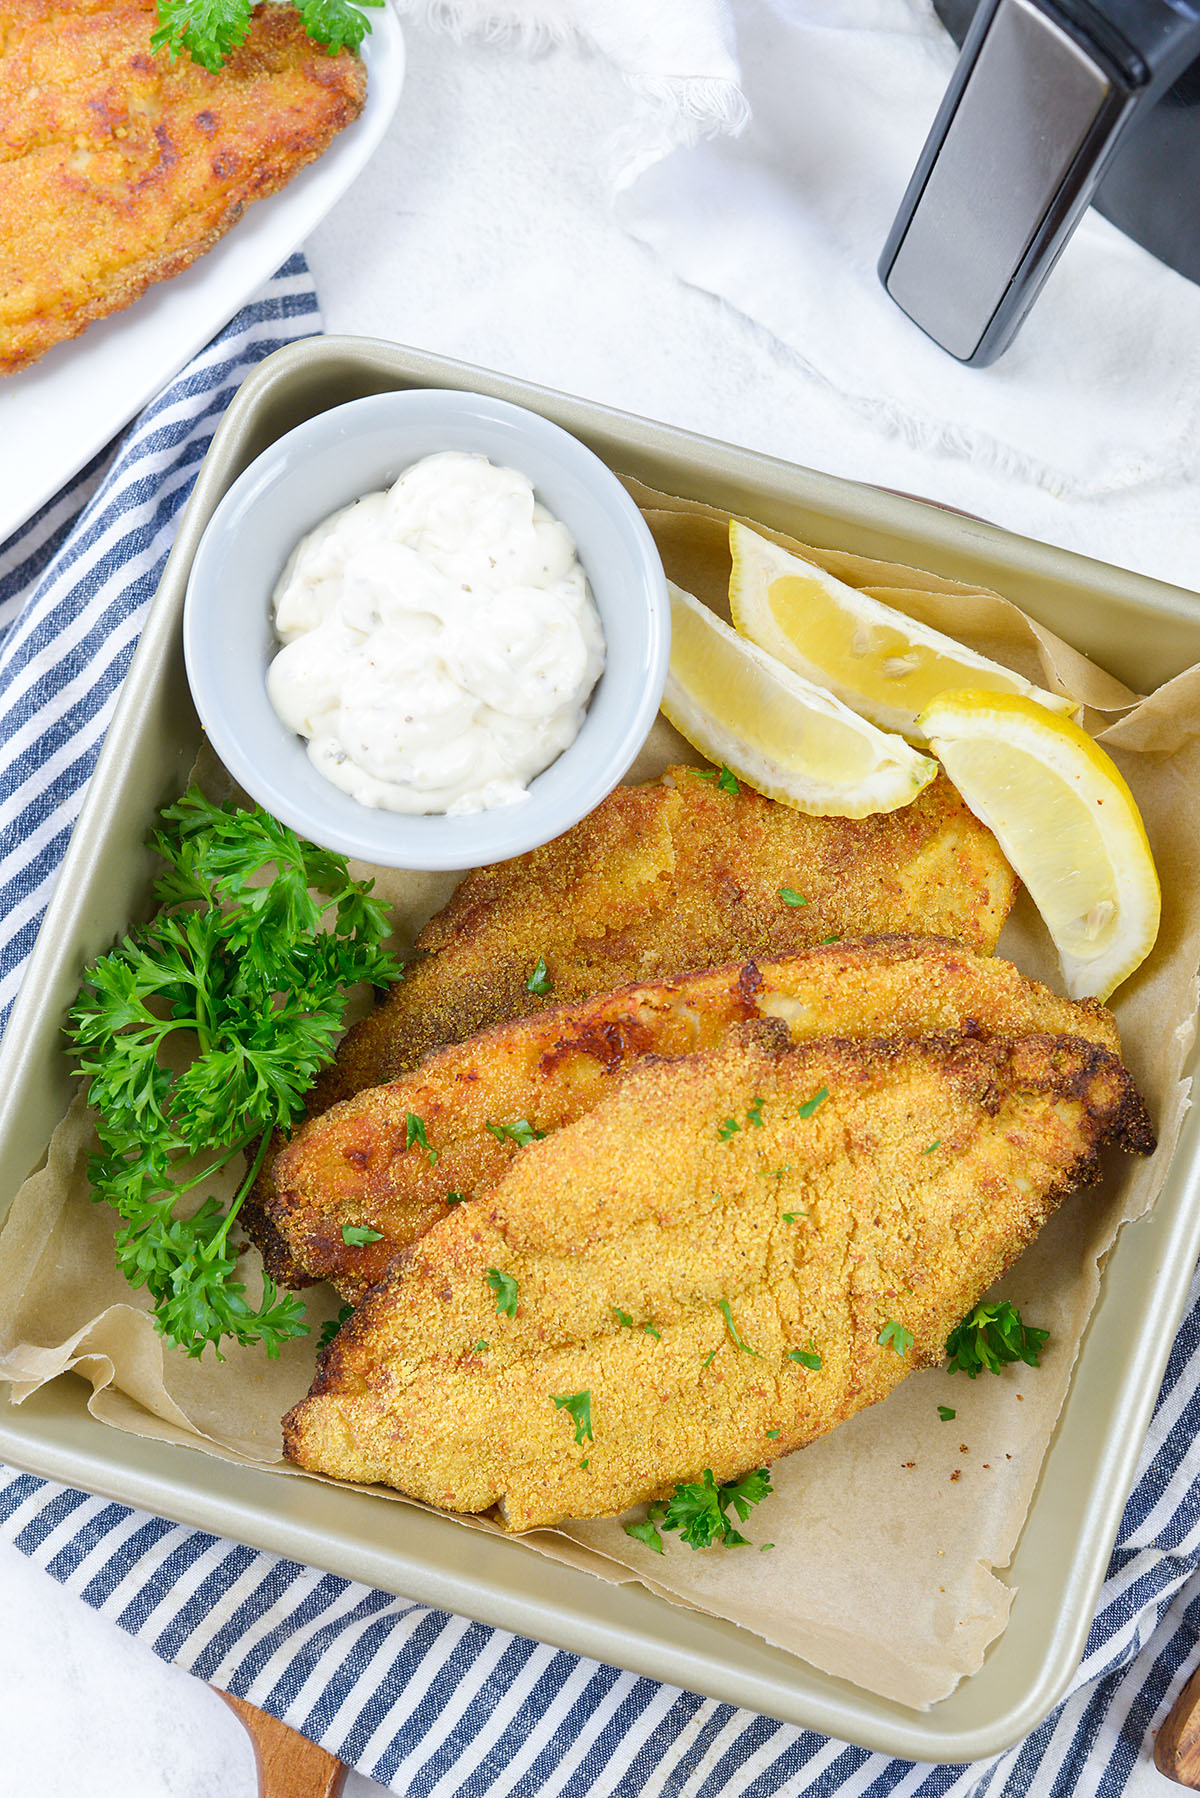 Overhead view of a tray of catfish fillets with lemon wedges.